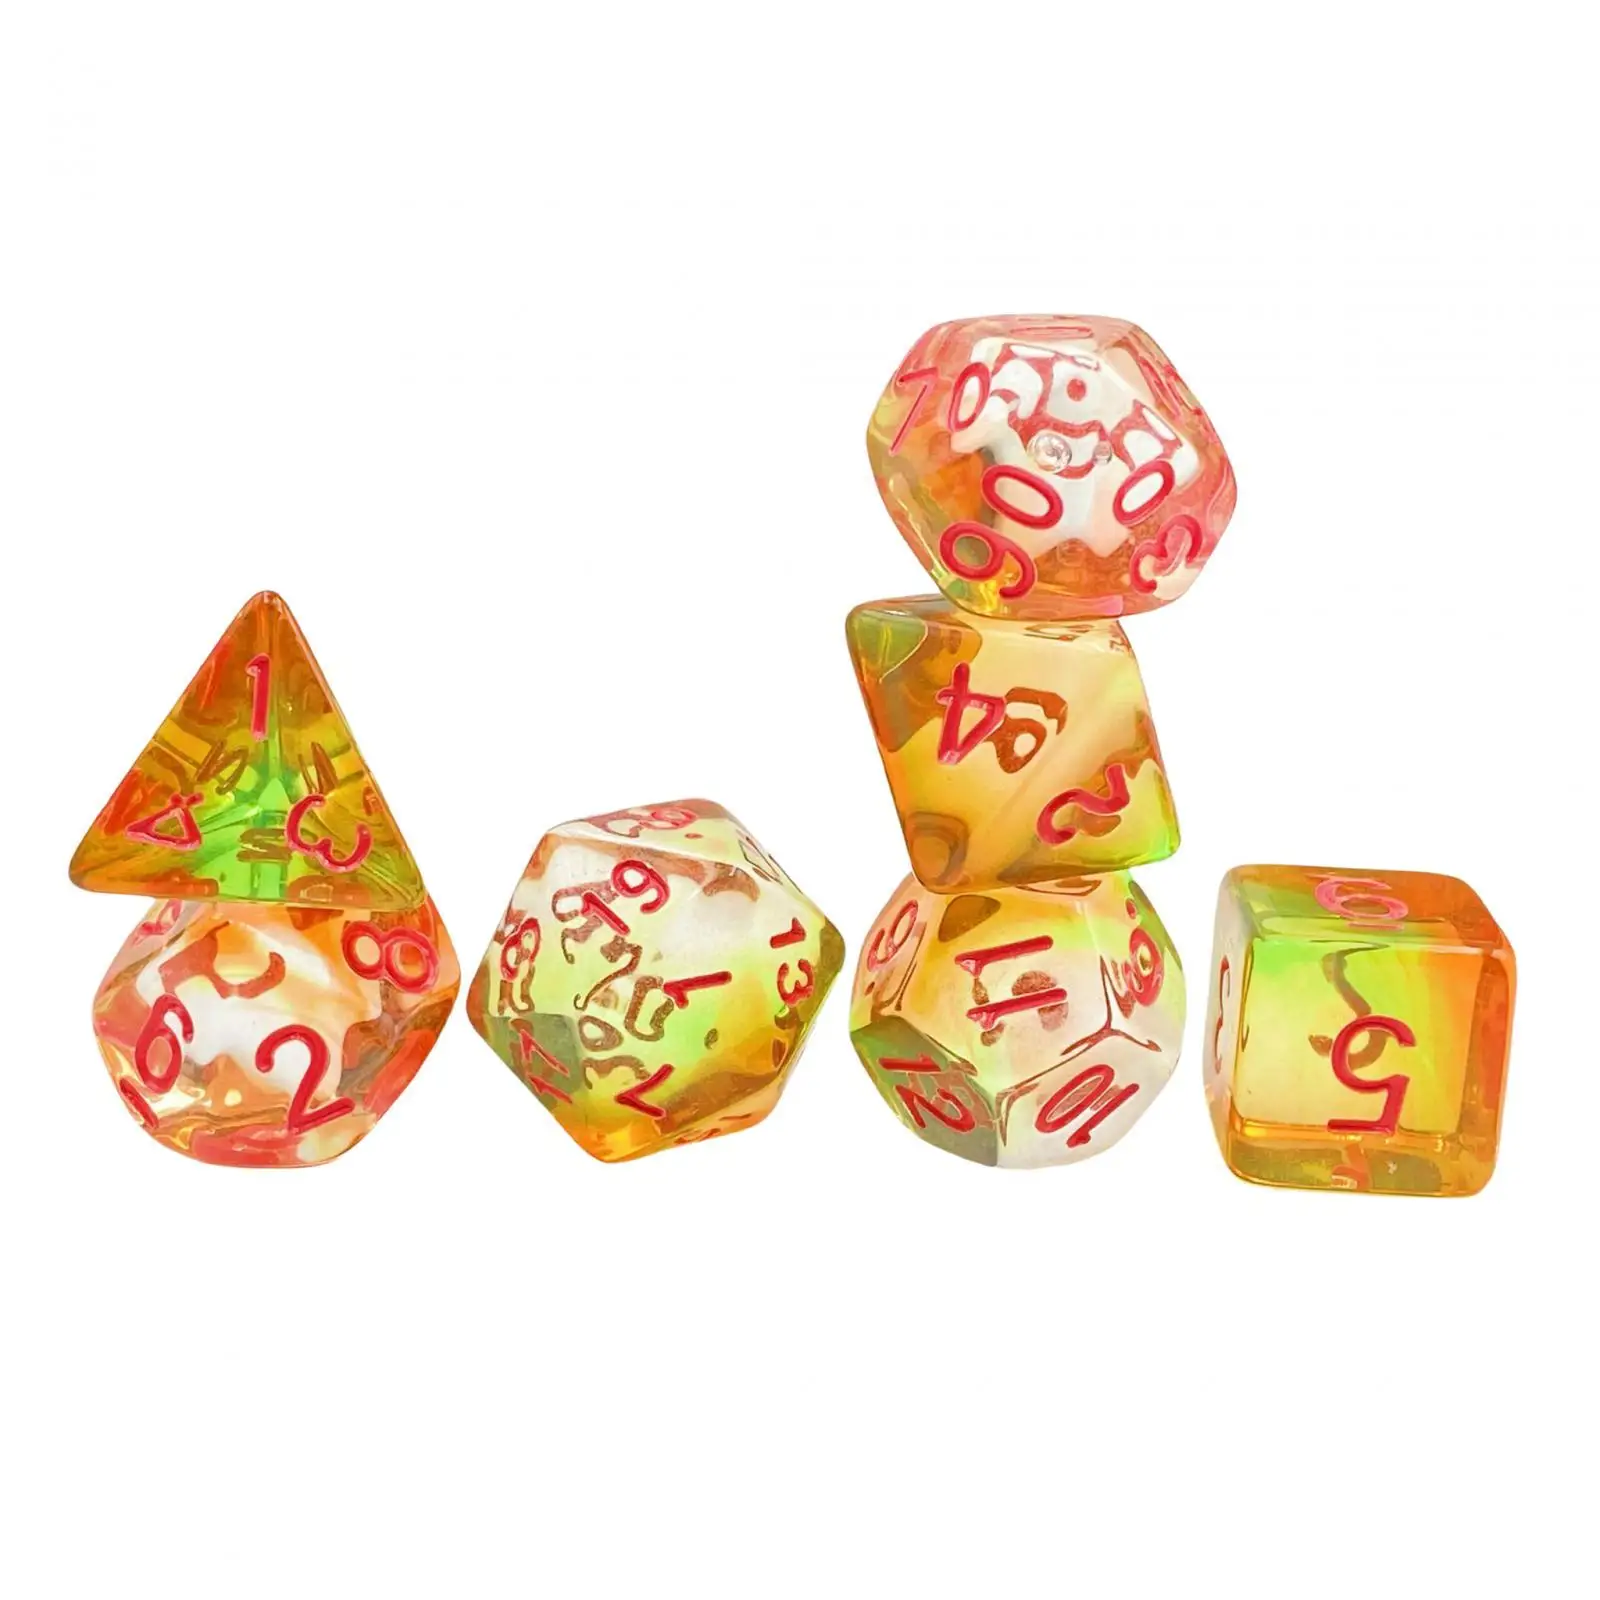 7 Pieces Polyhedral Dices Set Game Dices D4-d20 Entertainment Toys Multi Sided Dices for Board Game Card Game Role Playing Game